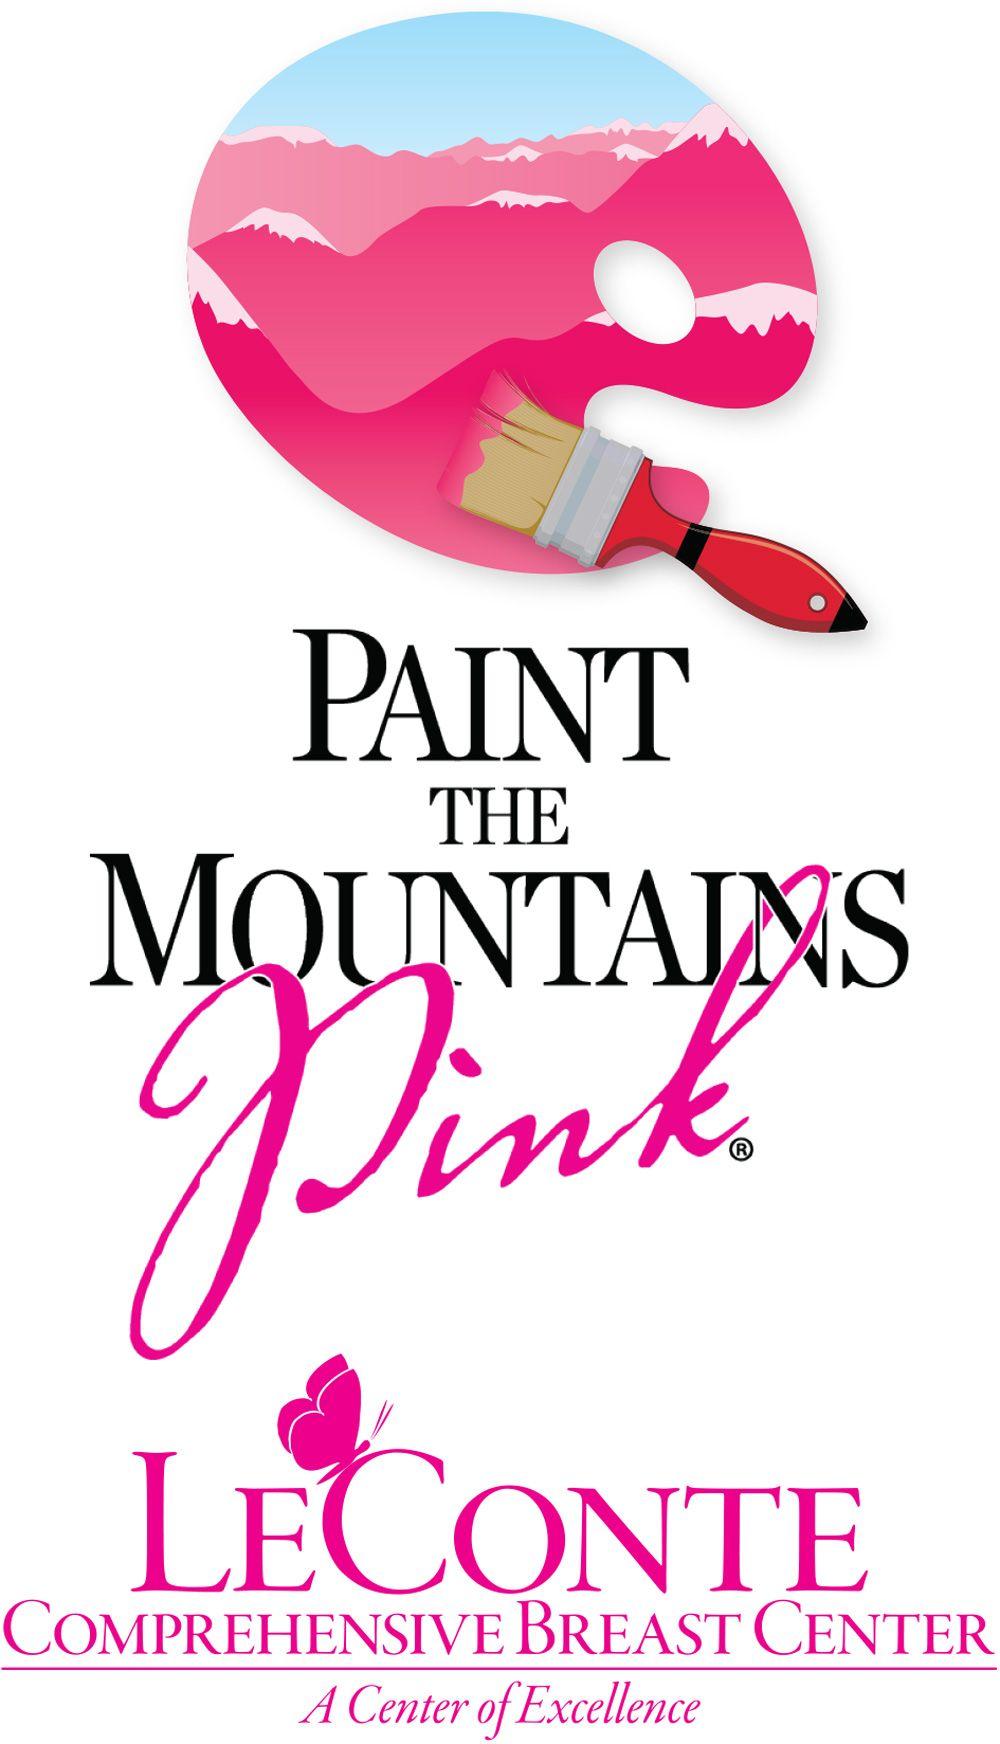 Mountains with Pink Logo - Combined Paint the Mountains Pink and Leconte Comprehensive Breast ...